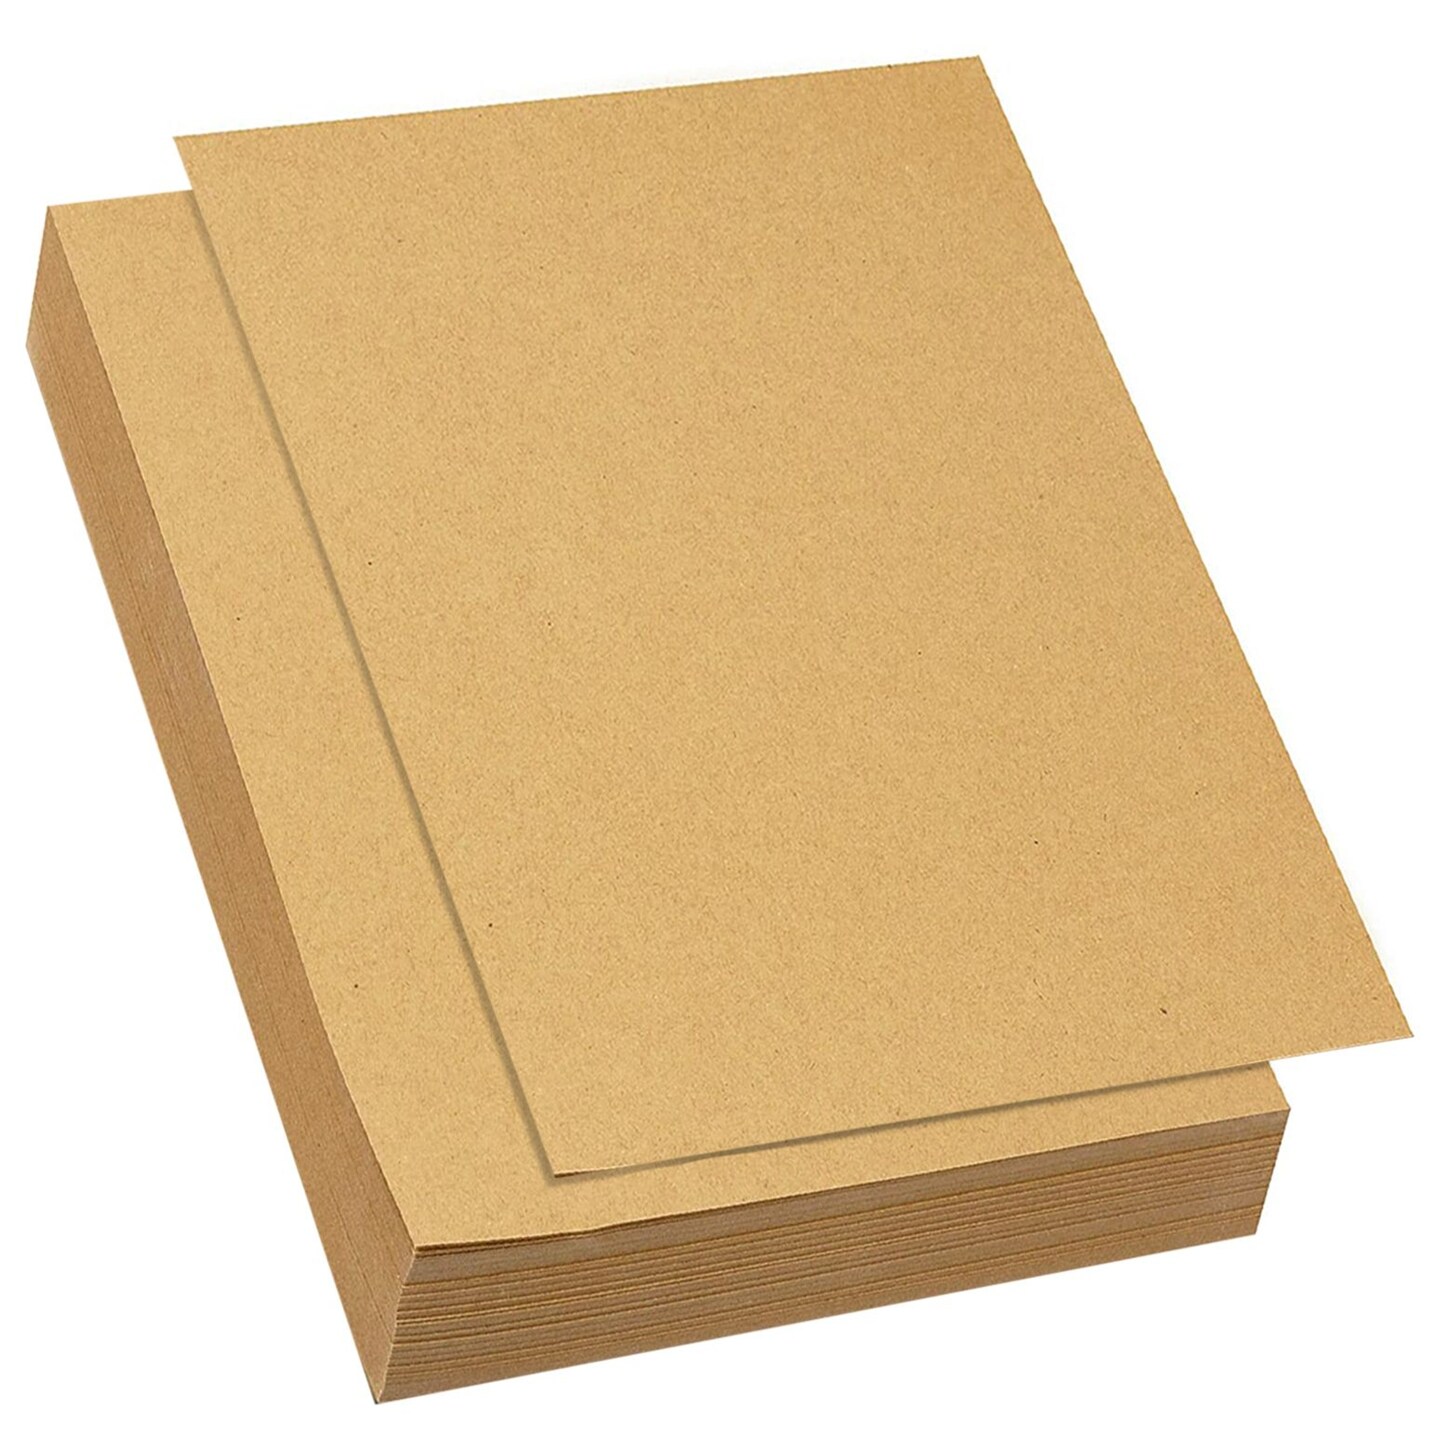 200 Pack Brown Craft Paper for DIY Projects, Classroom, Letter